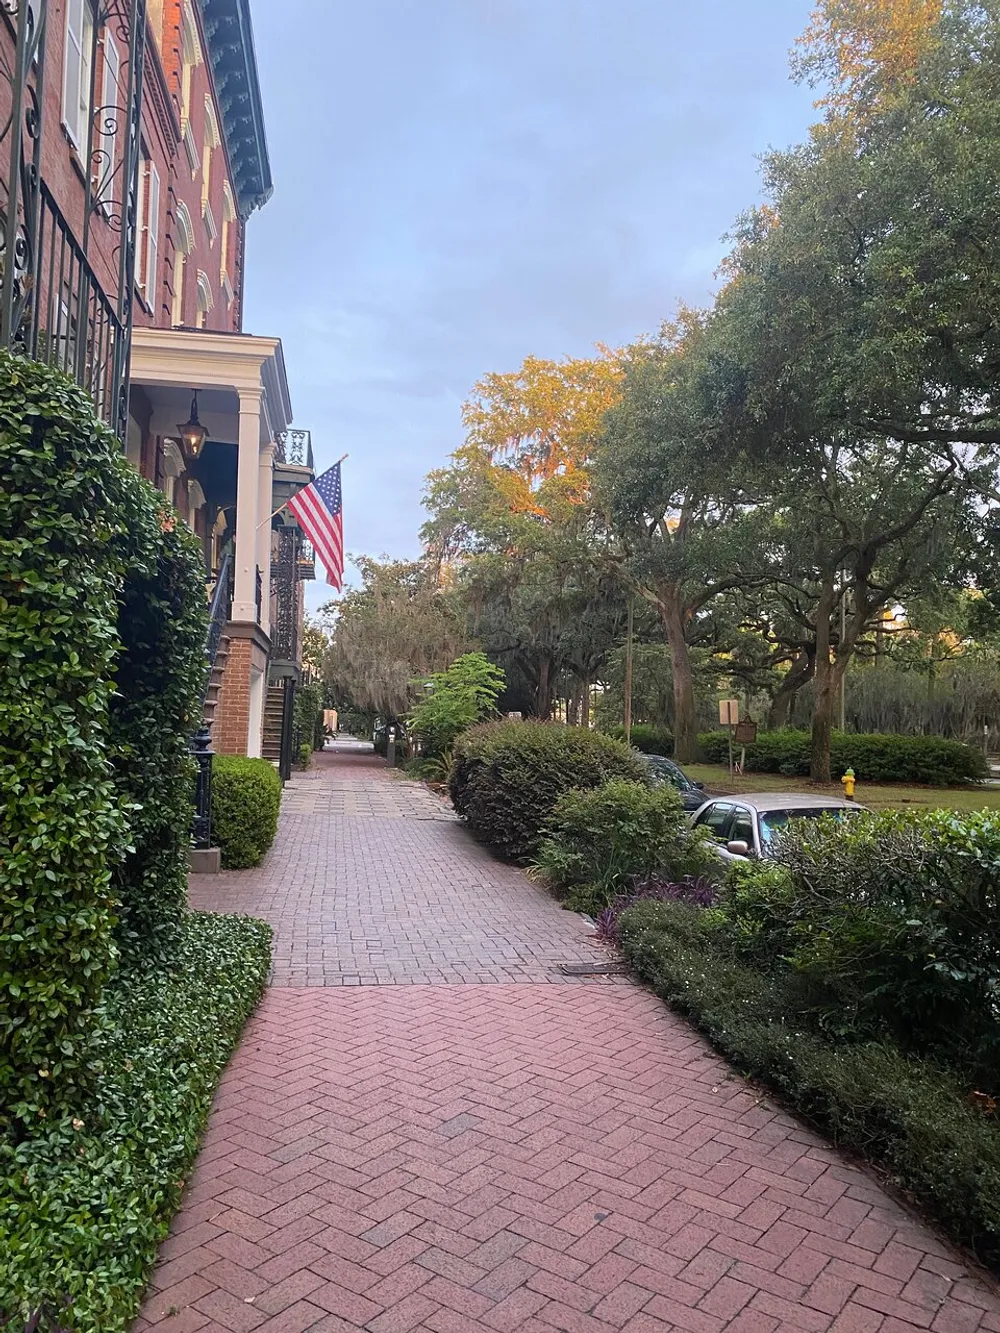 The image shows a tranquil brick-paved street lined with well-maintained hedges and trees alongside elegant buildings with an American flag hanging from a balcony suggesting a peaceful residential area